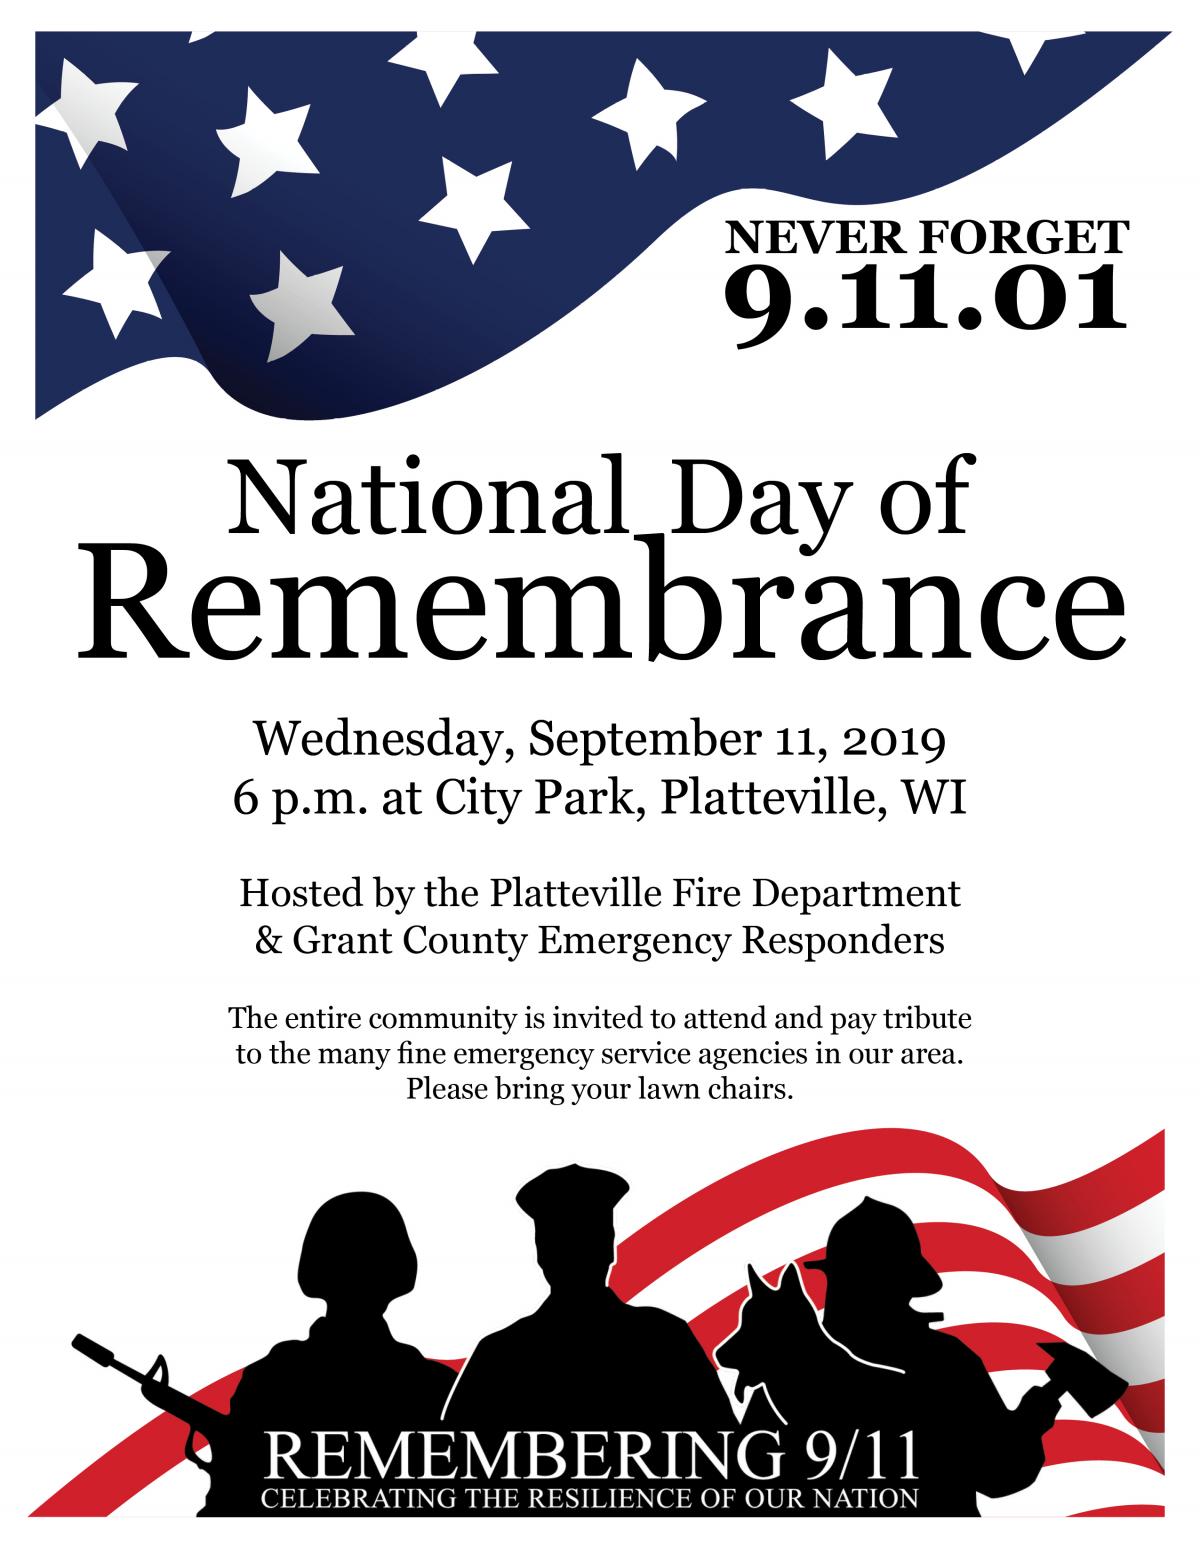 National Day of Remembrance Poster